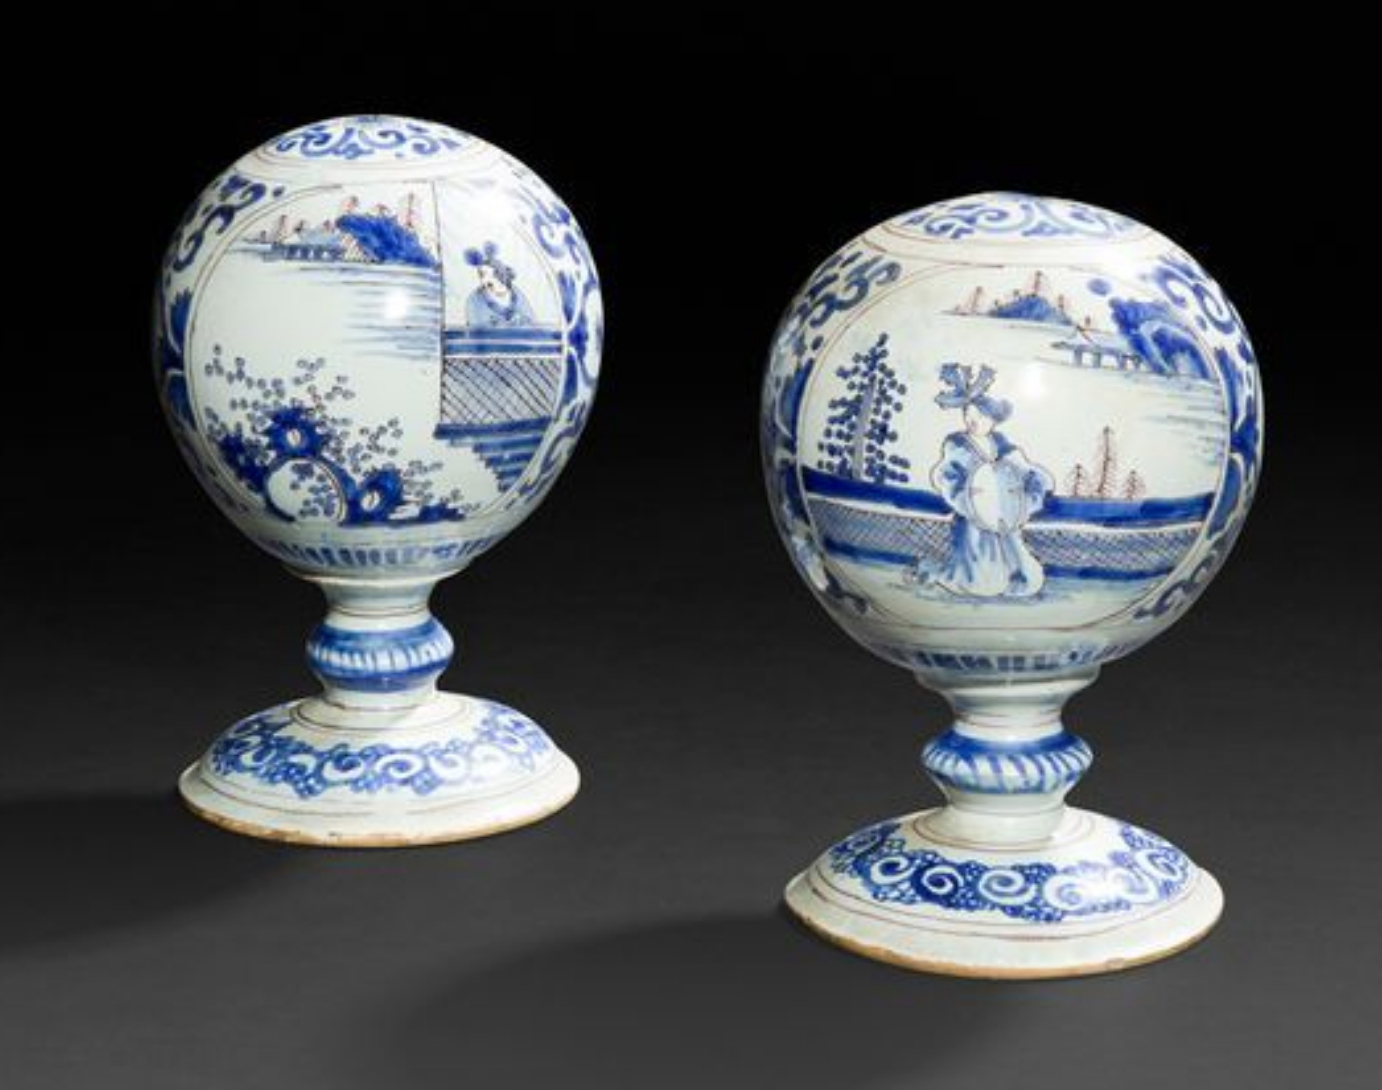 €5,376Nevers, c. 1680. Pair of faïence wig stands decorated with monochrome blue Chinese figures in landscapes, h. 15 cm/5.90 in. Paris, D